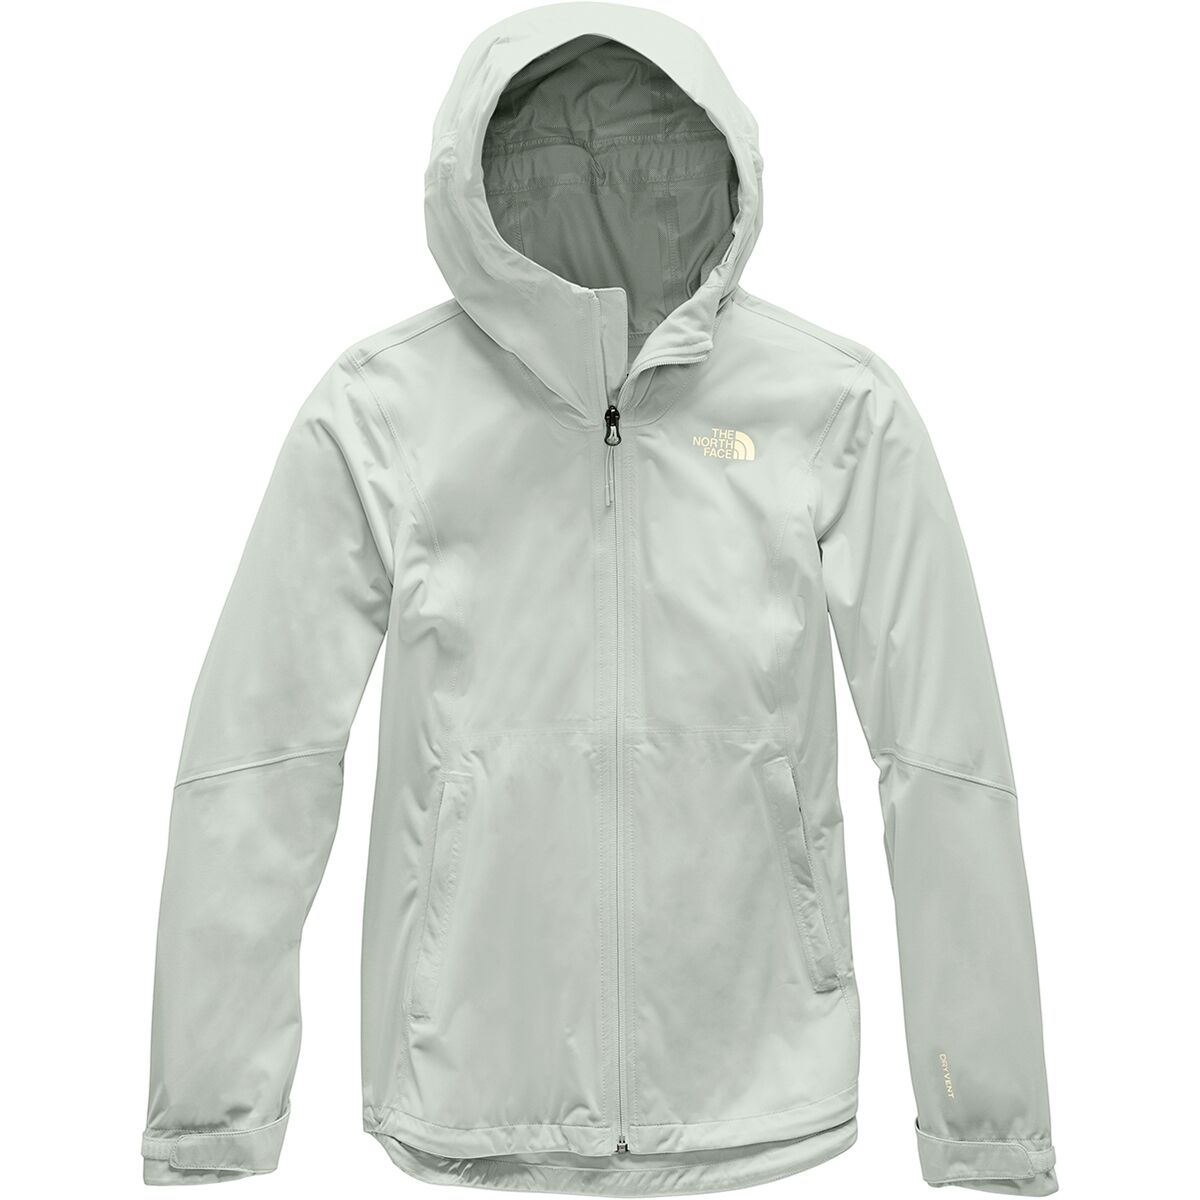 The North Face Allproof Stretch Jacket - Women's | Backcountry.com